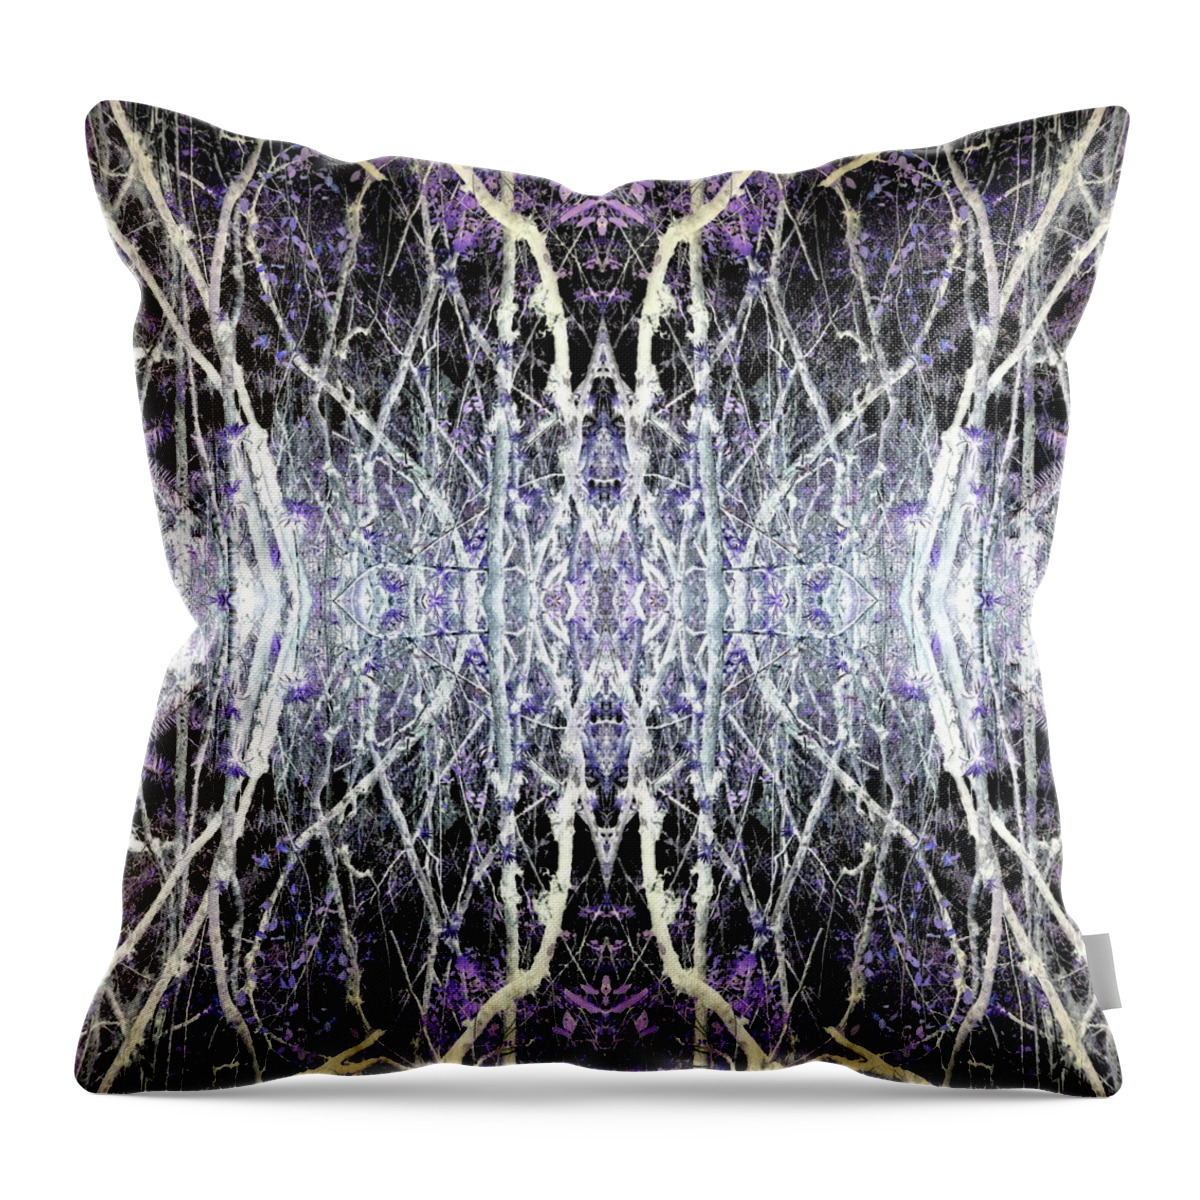 Tangled Woods Throw Pillow featuring the digital art Tangled Woods by Teresamarie Yawn